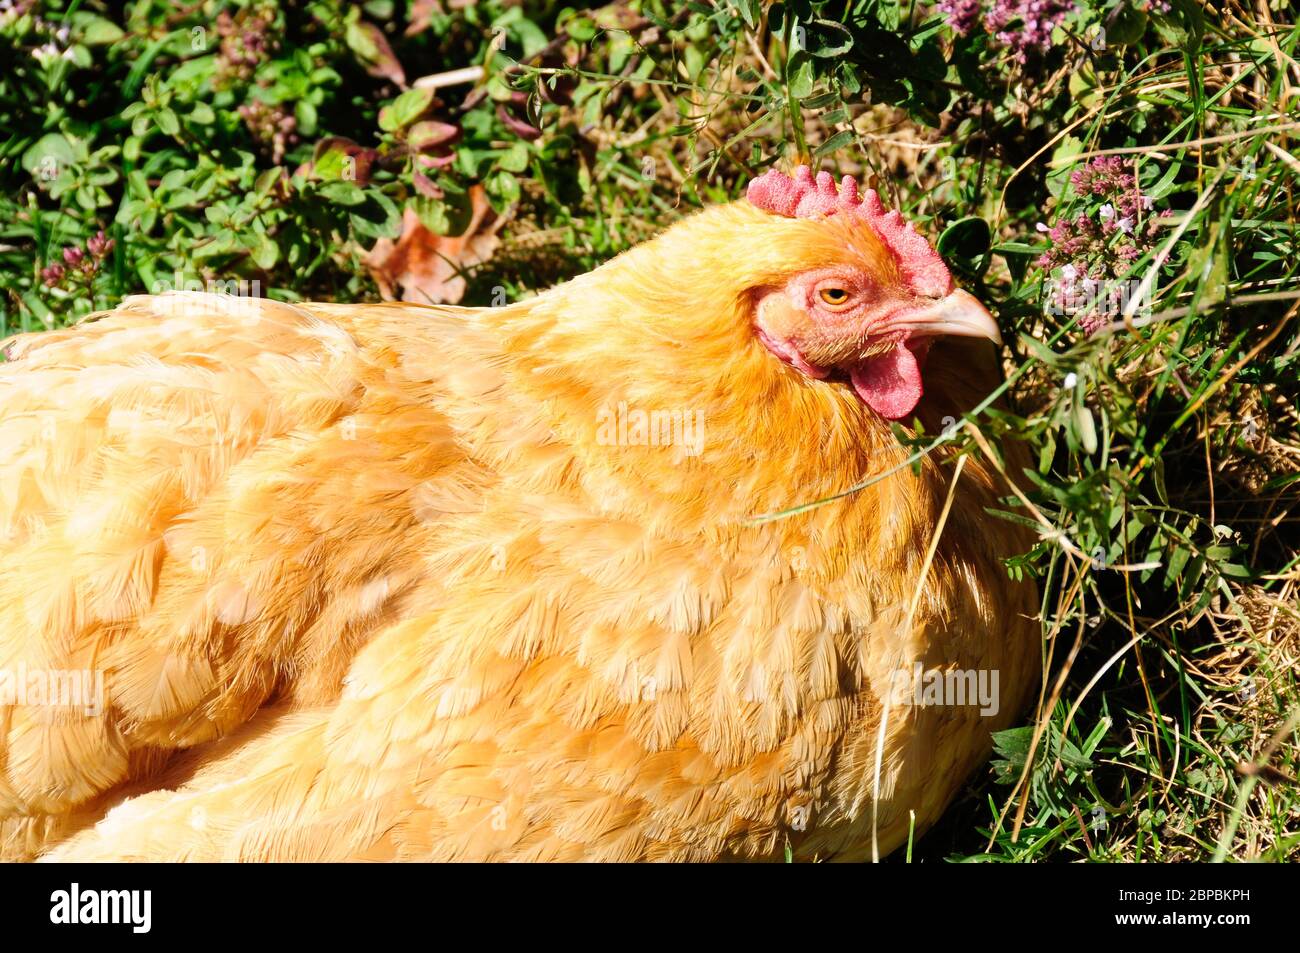 A large golden hen sitting on her nest with green vegetation behind her. Stock Photo